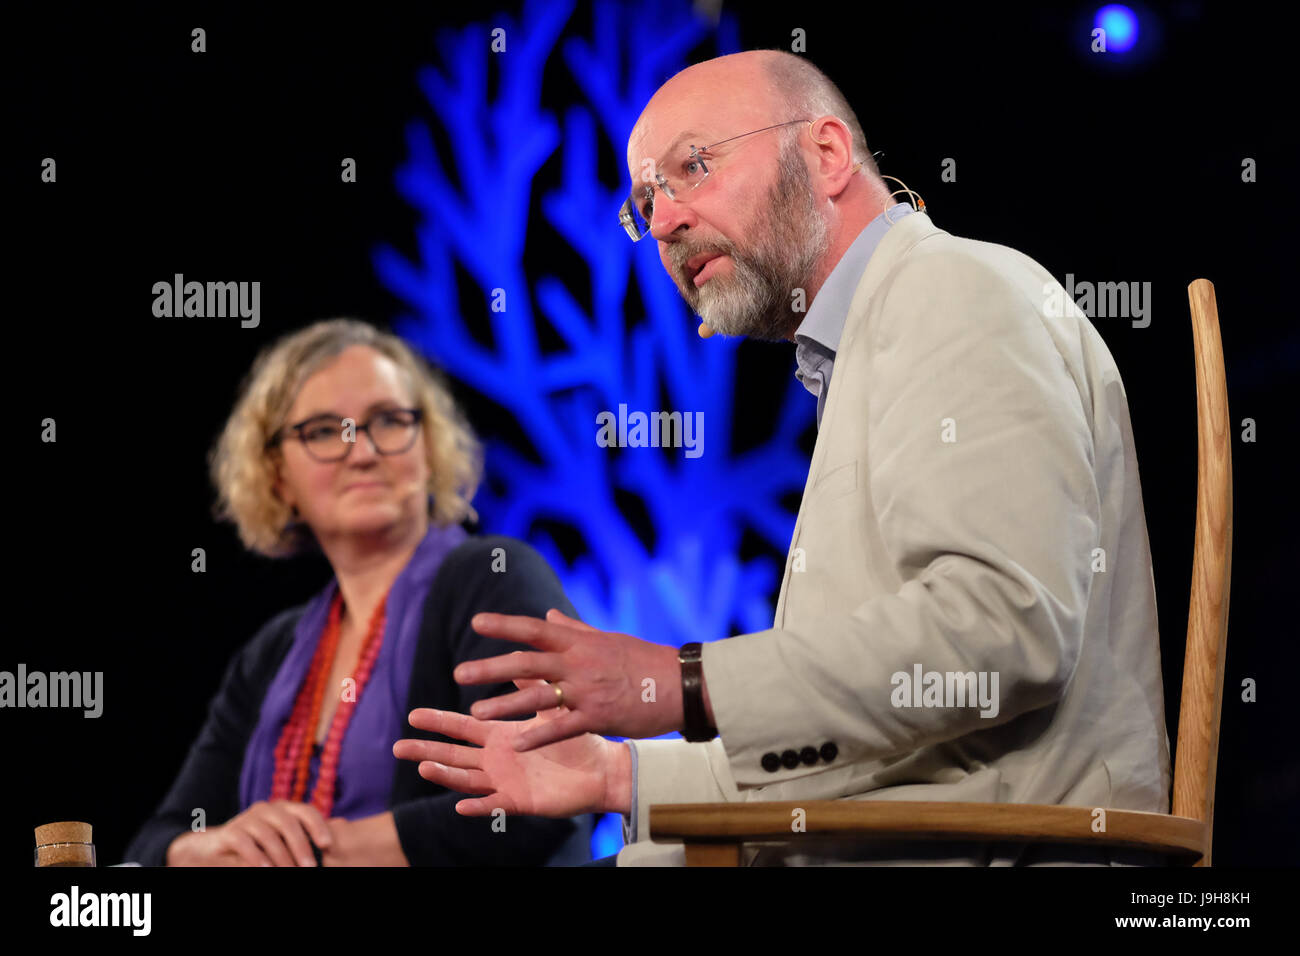 Hay Festival 2017 - Hay on Wye, Wales, UK - Friday 2nd June 2017 - Ian Cobain investigative journalist on stage at the Hay Festival talking about the culture of secrecy and his book The History Thieves - the Hay Festival celebrates its 30th anniversary in 2017 - the literary festival runs until Sunday June 4th. Credit: Steven May/Alamy Live News Stock Photo